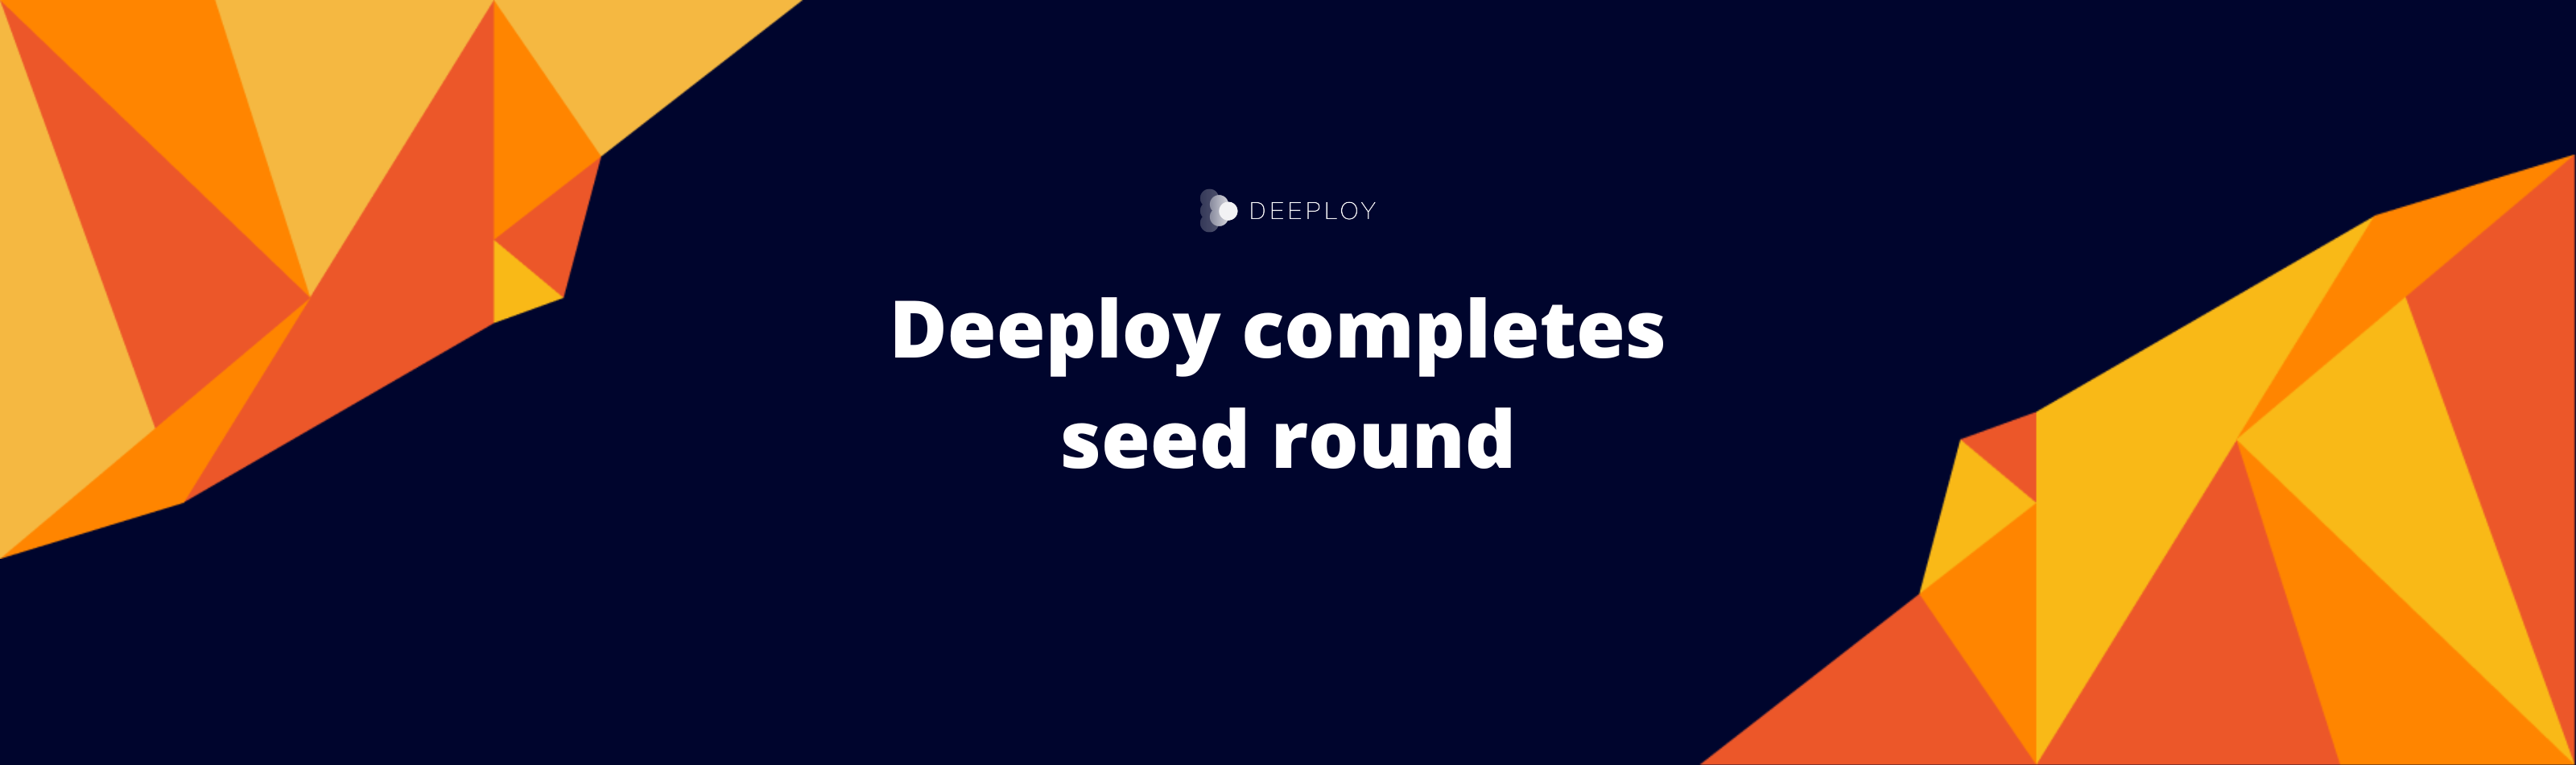 Deeploy extends its Seed Round to EUR 2.5M